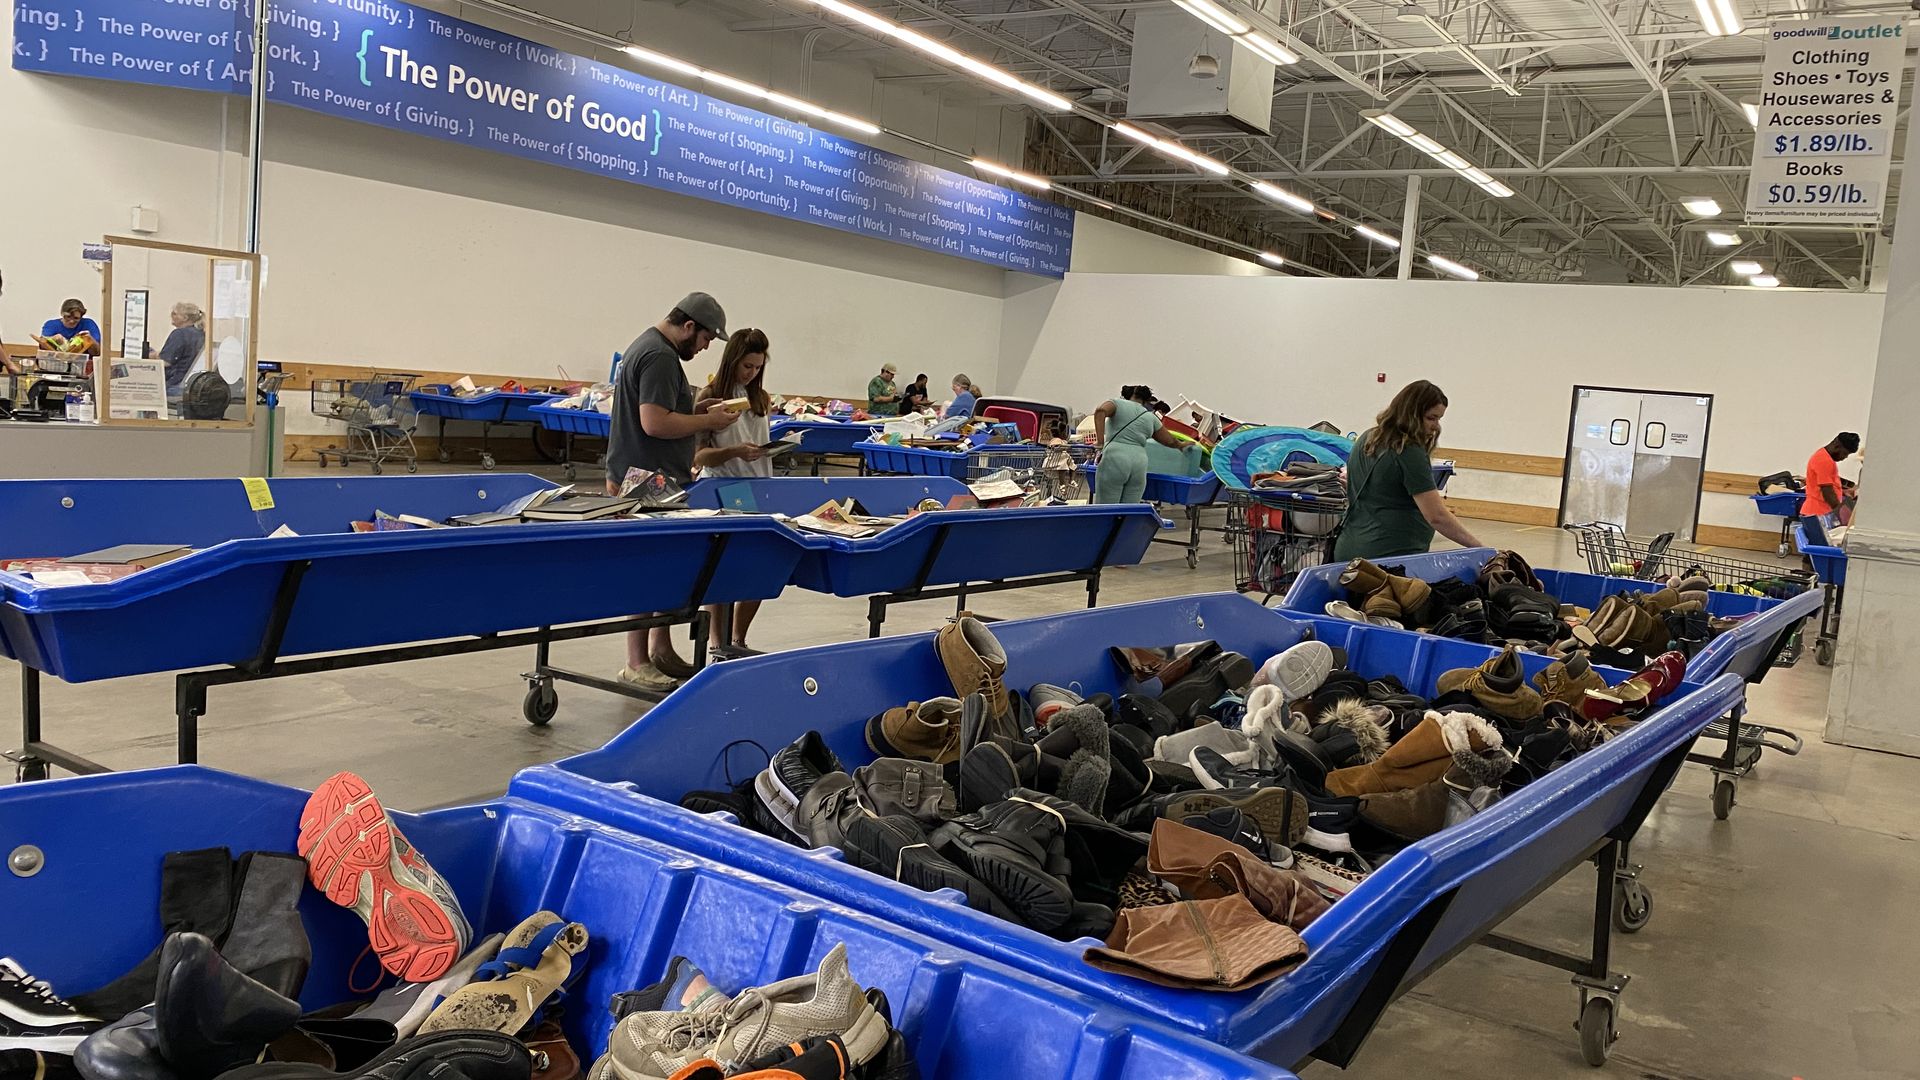 Rows of blue Goodwill bins full of shoes